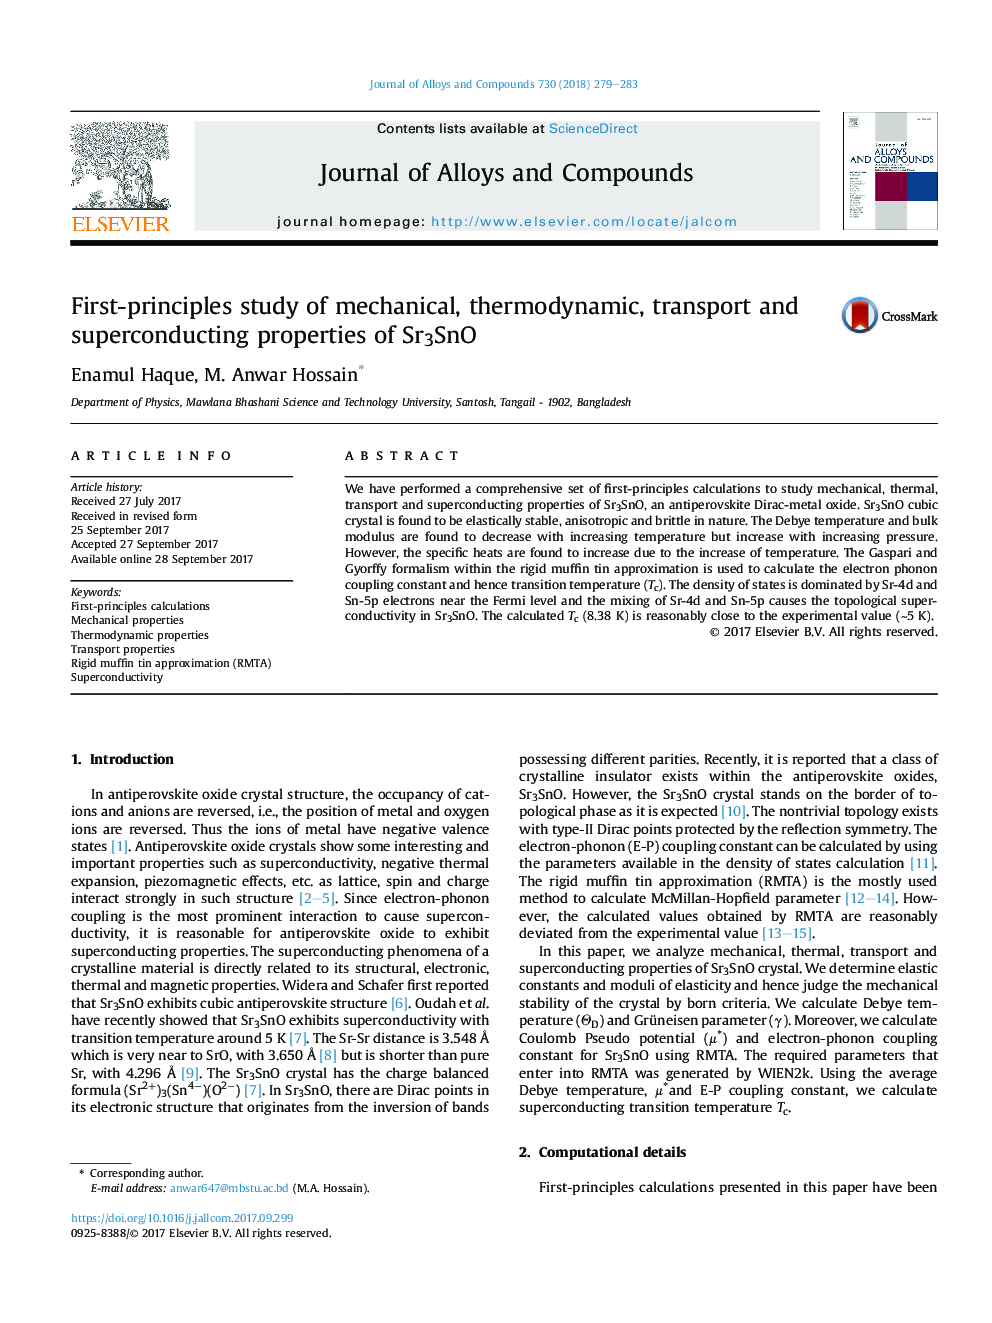 First-principles study of mechanical, thermodynamic, transport and superconducting properties of Sr3SnO